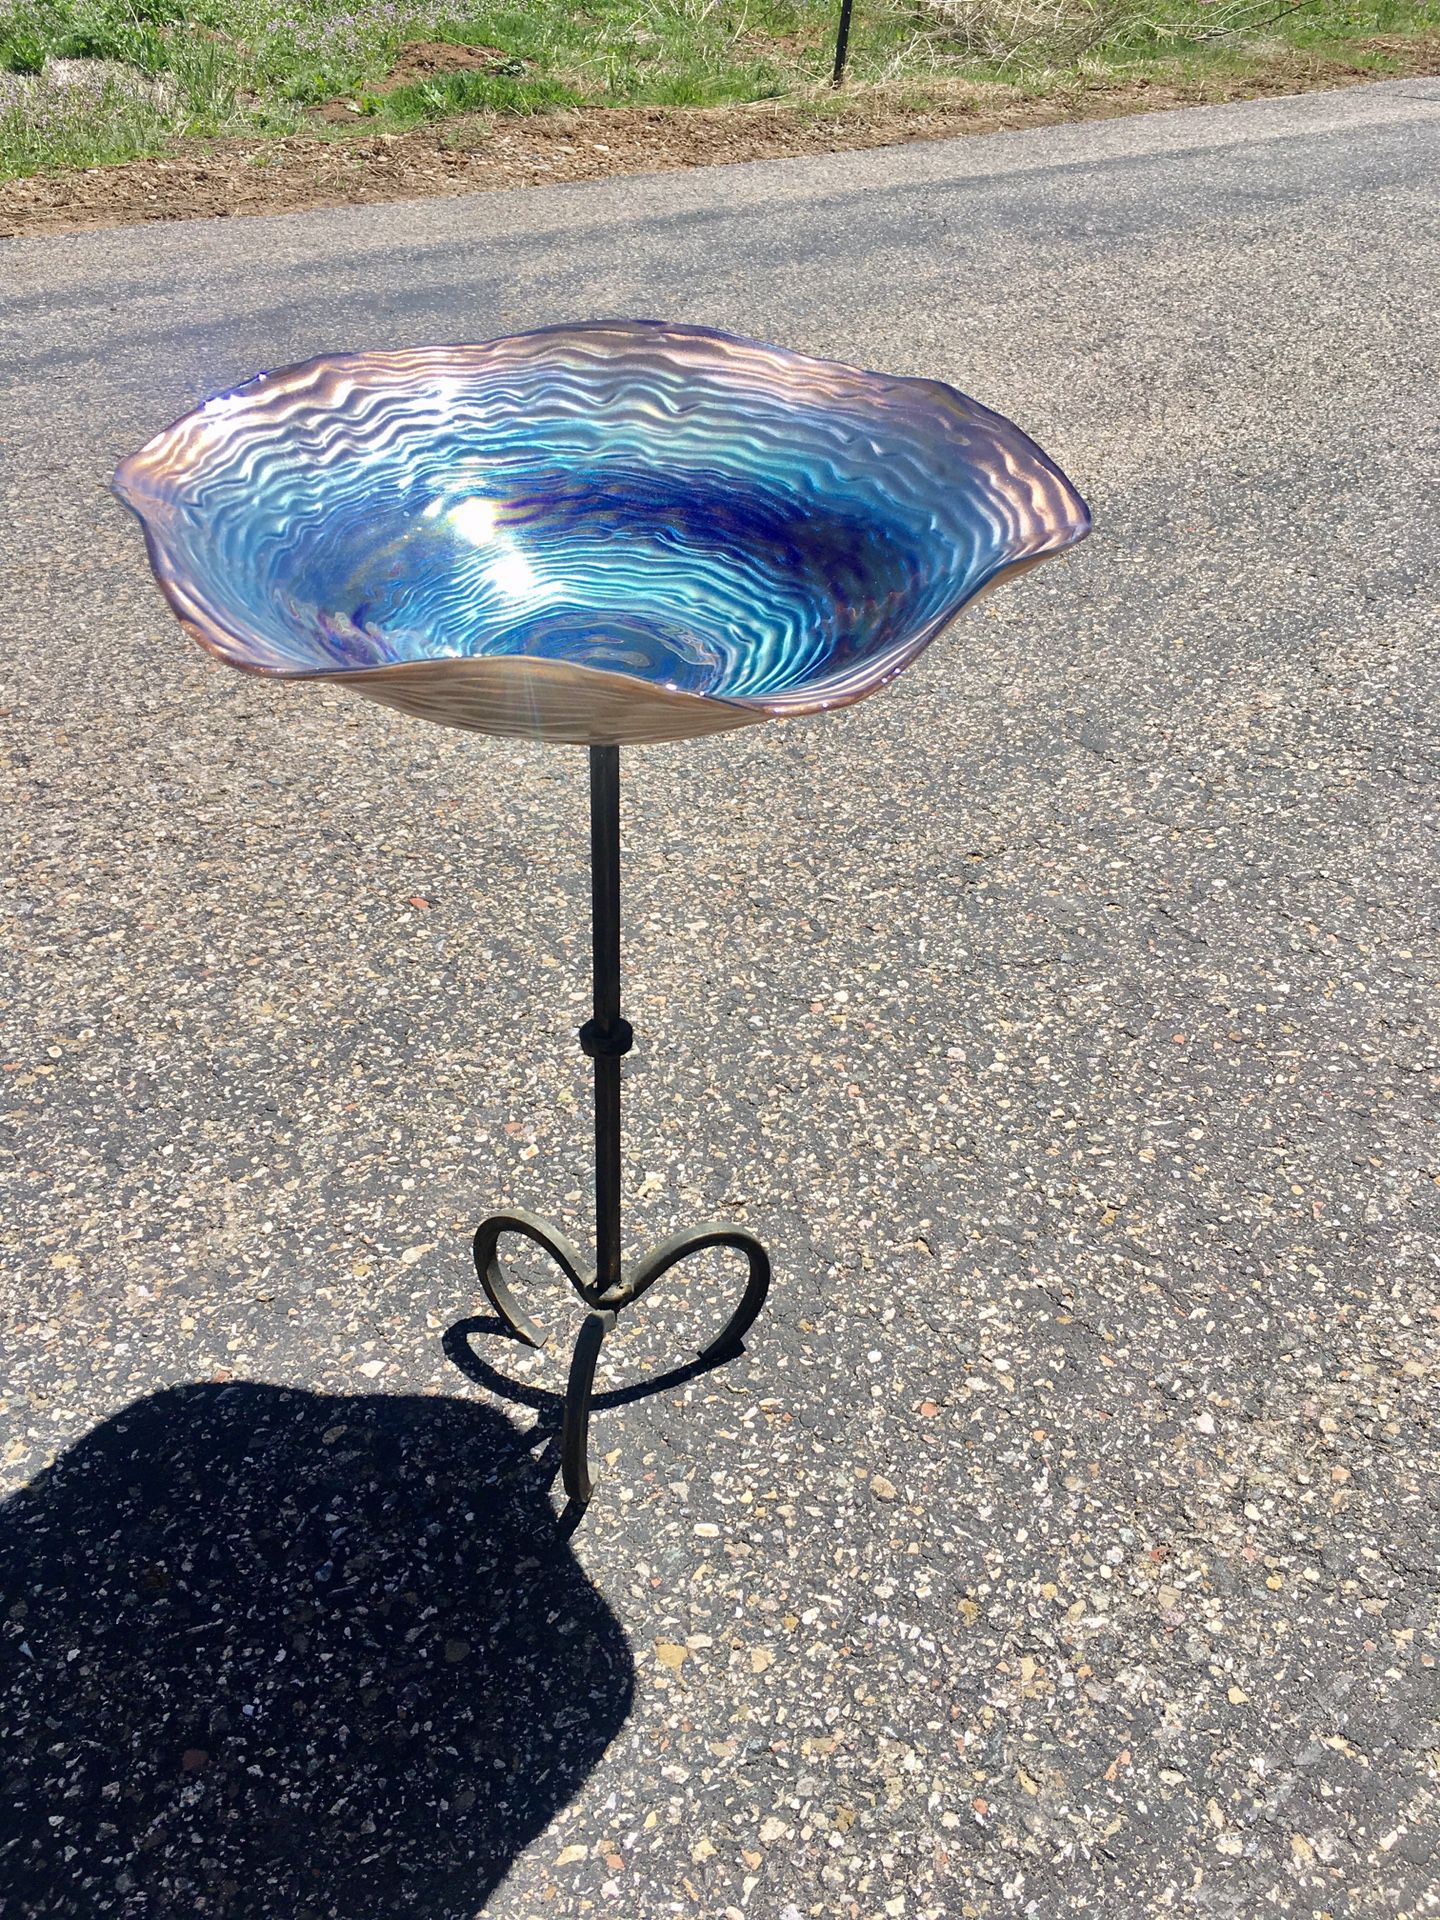 Bird Bath for your garden! Beautiful Swirls of glass in iridescent bold shiny colors choose a stand!